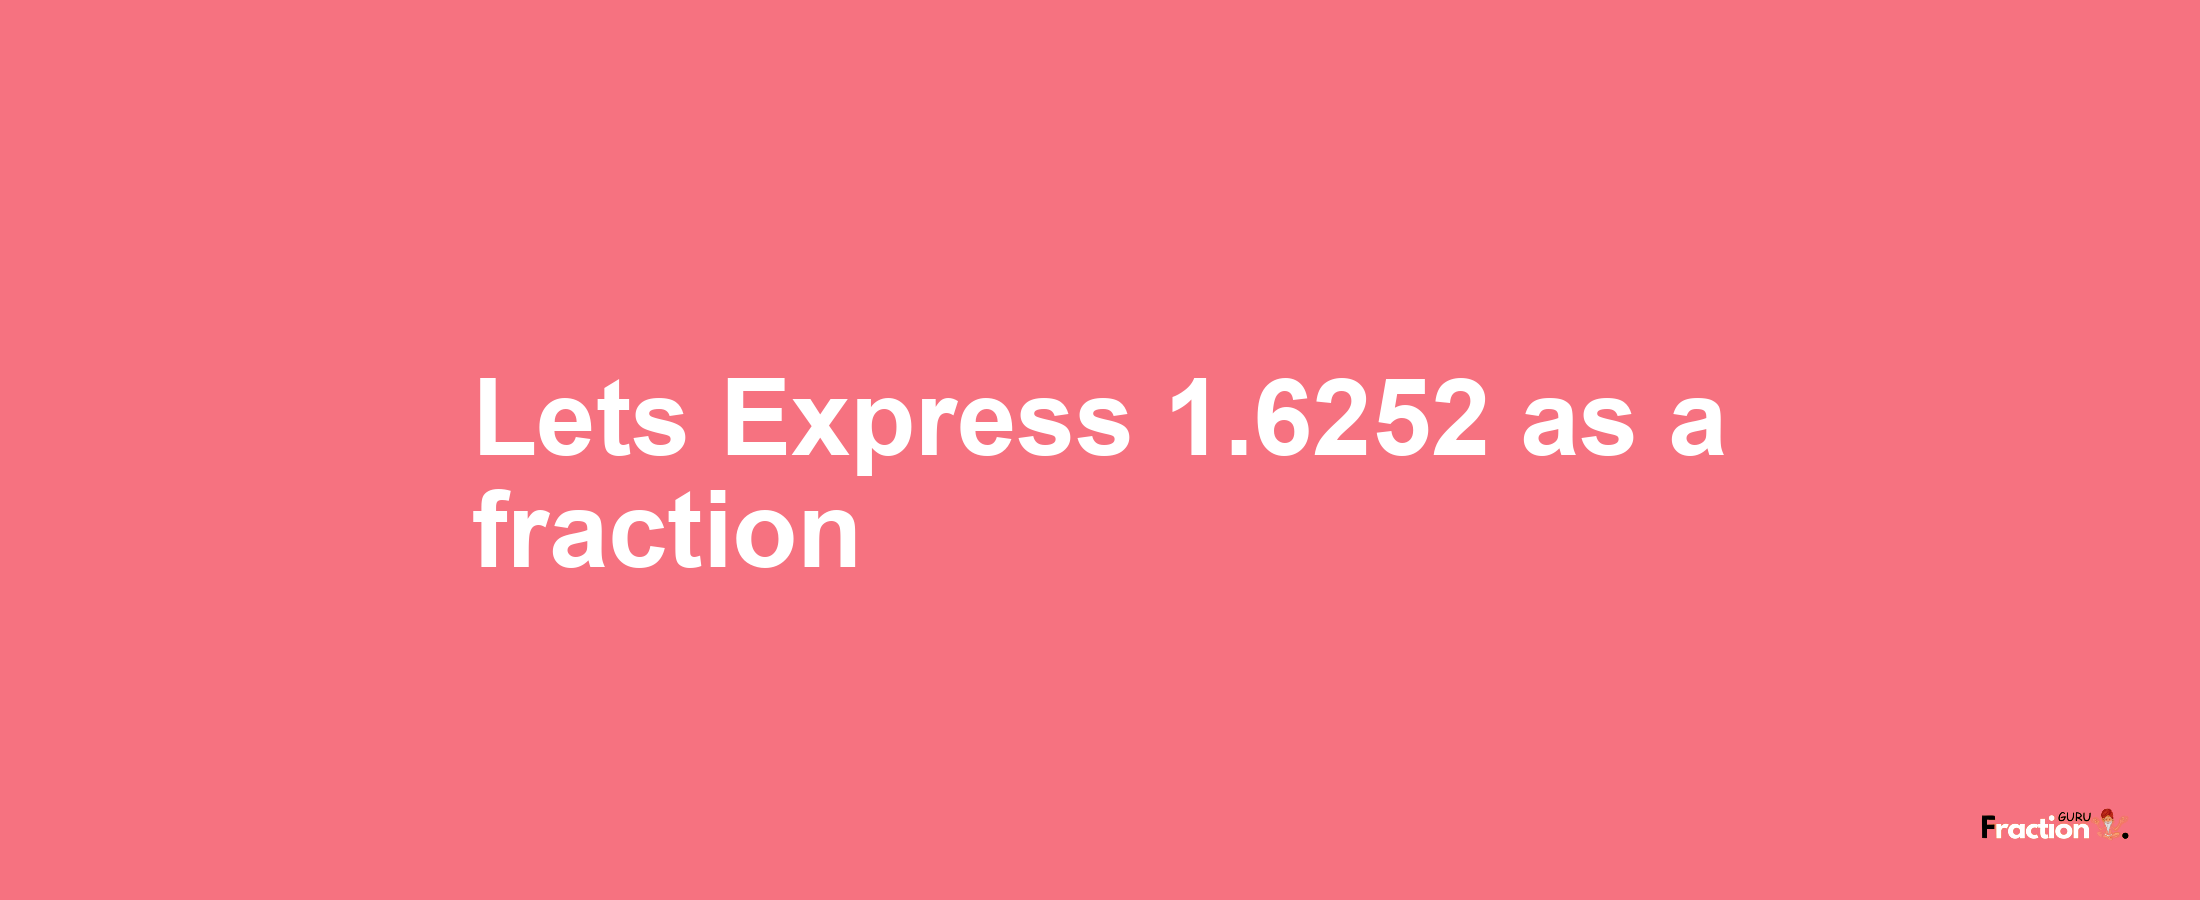 Lets Express 1.6252 as afraction